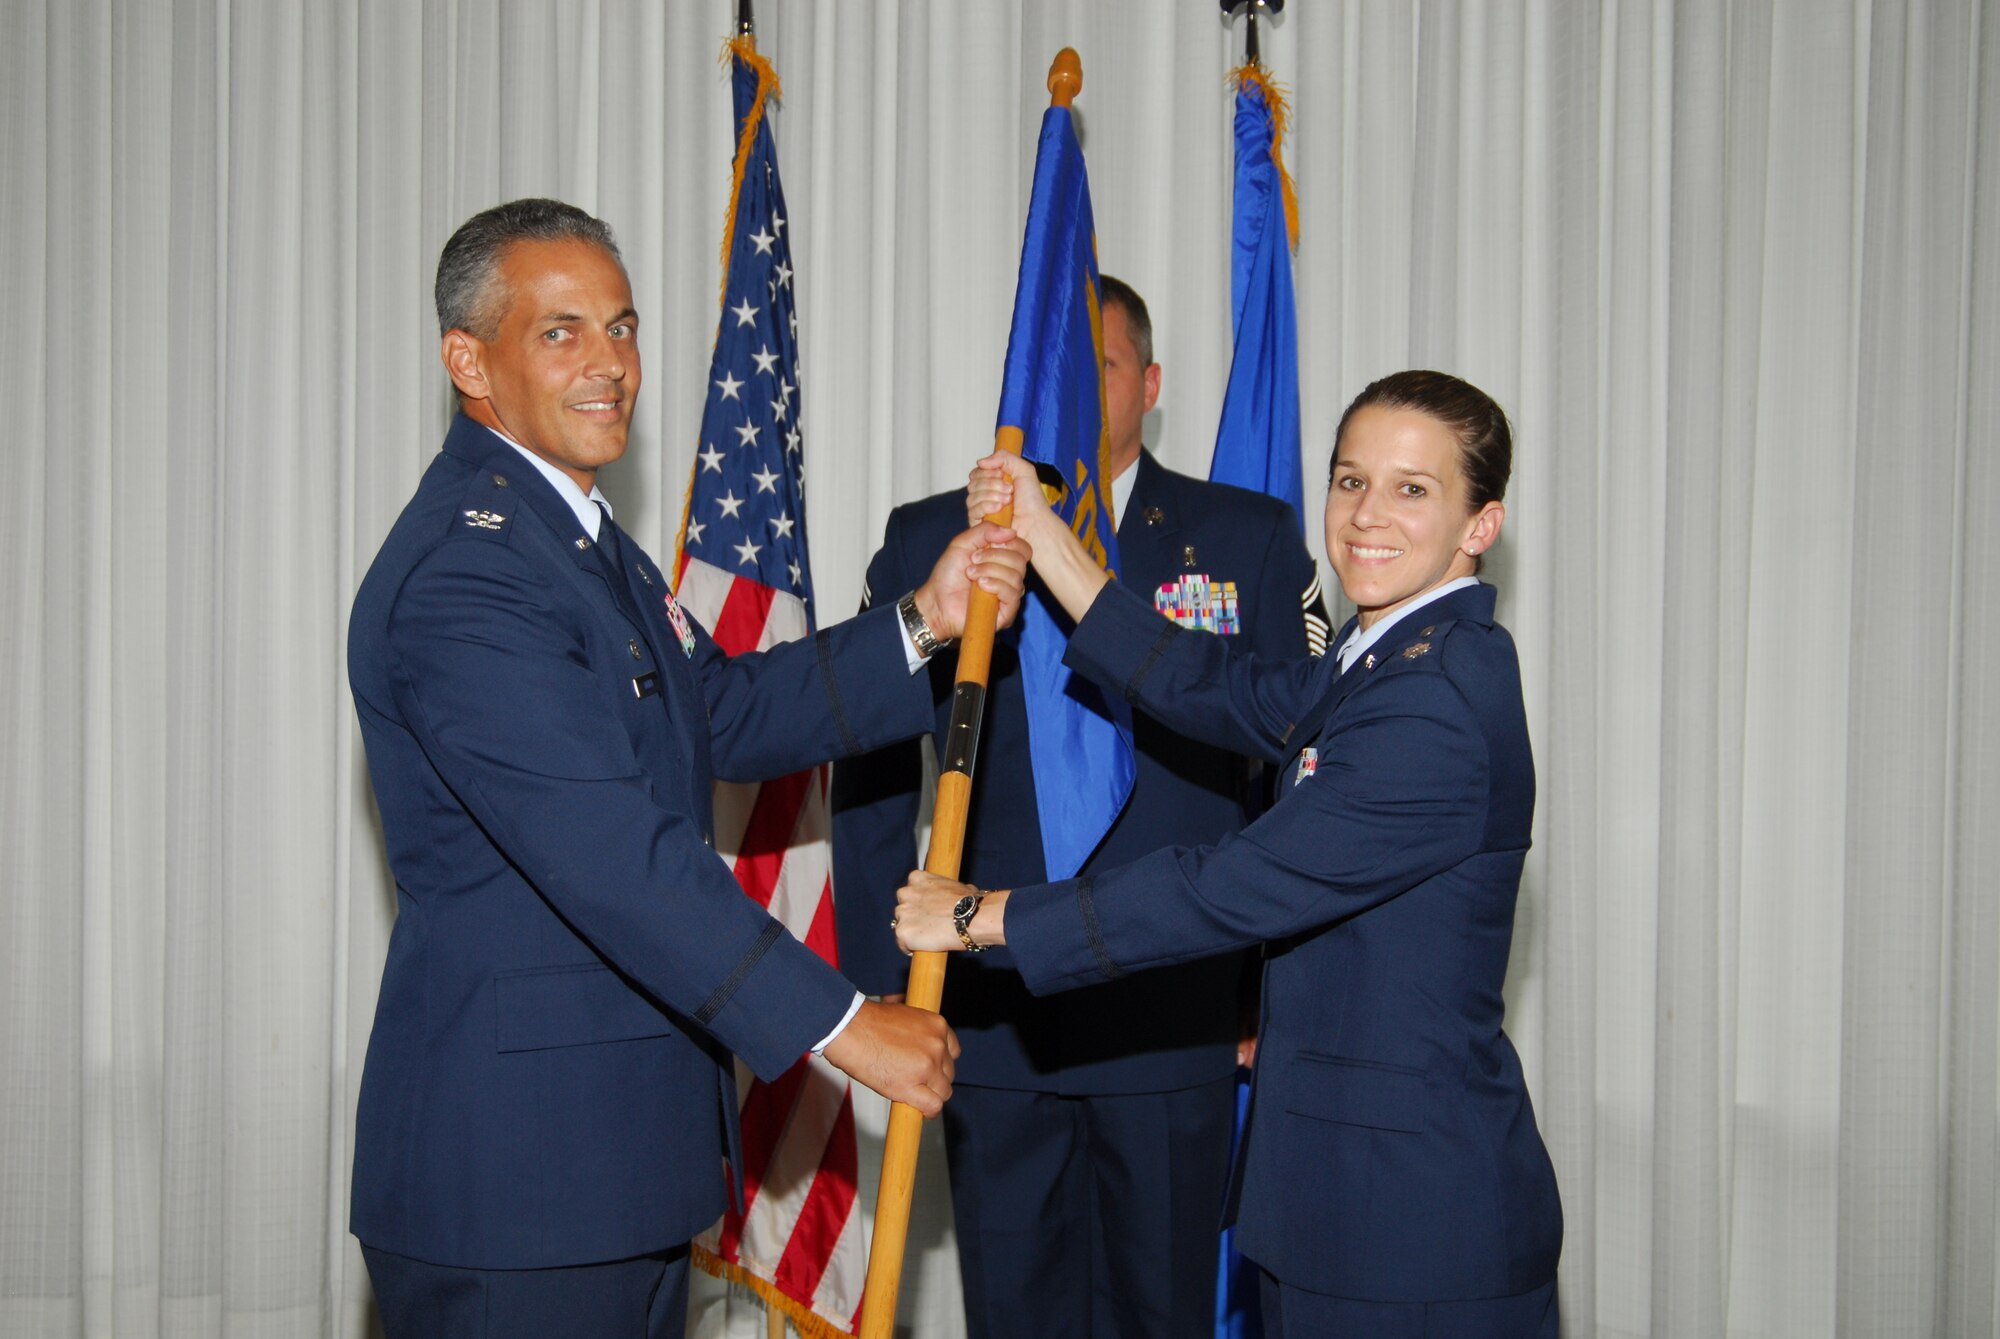 (Left) Col. Gino Auteri 325th Medical Group commander, presents the guidon to Lt. Col. Shari Silverman, as she takes command of the 325th Medical Support Squadron. The change of command ceremony took place July 10 at the Heritage Club. (U.S. Air Force photo/Lisa Norman)